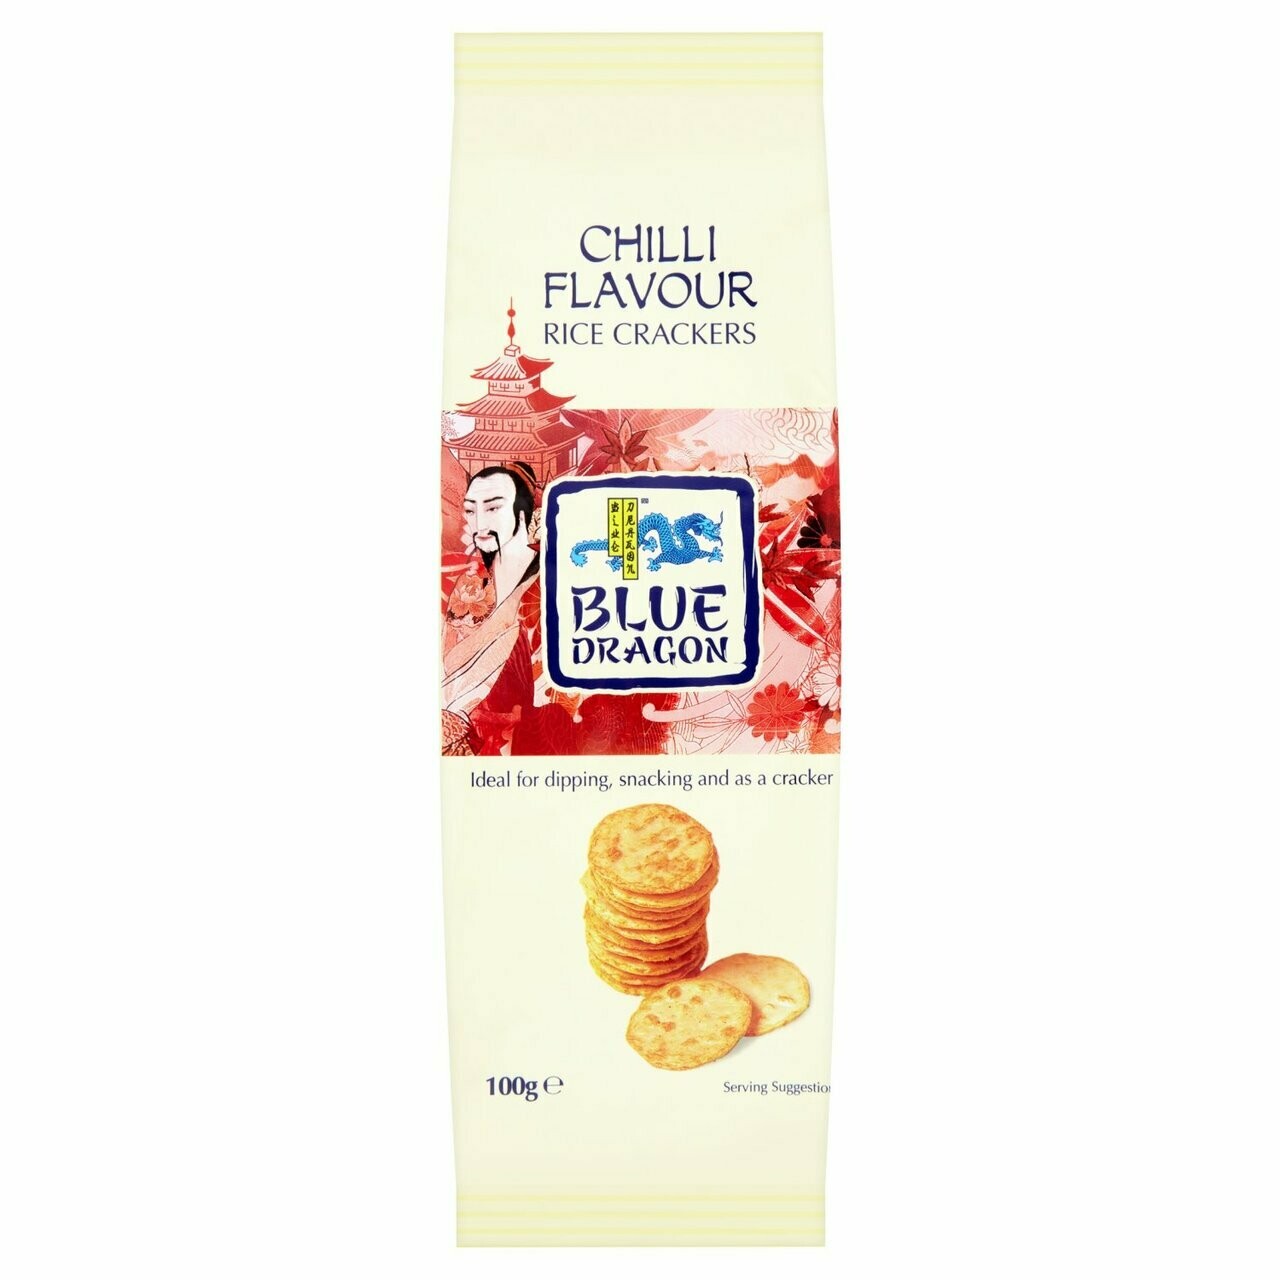 Rice Crackers - Chilli Flavour